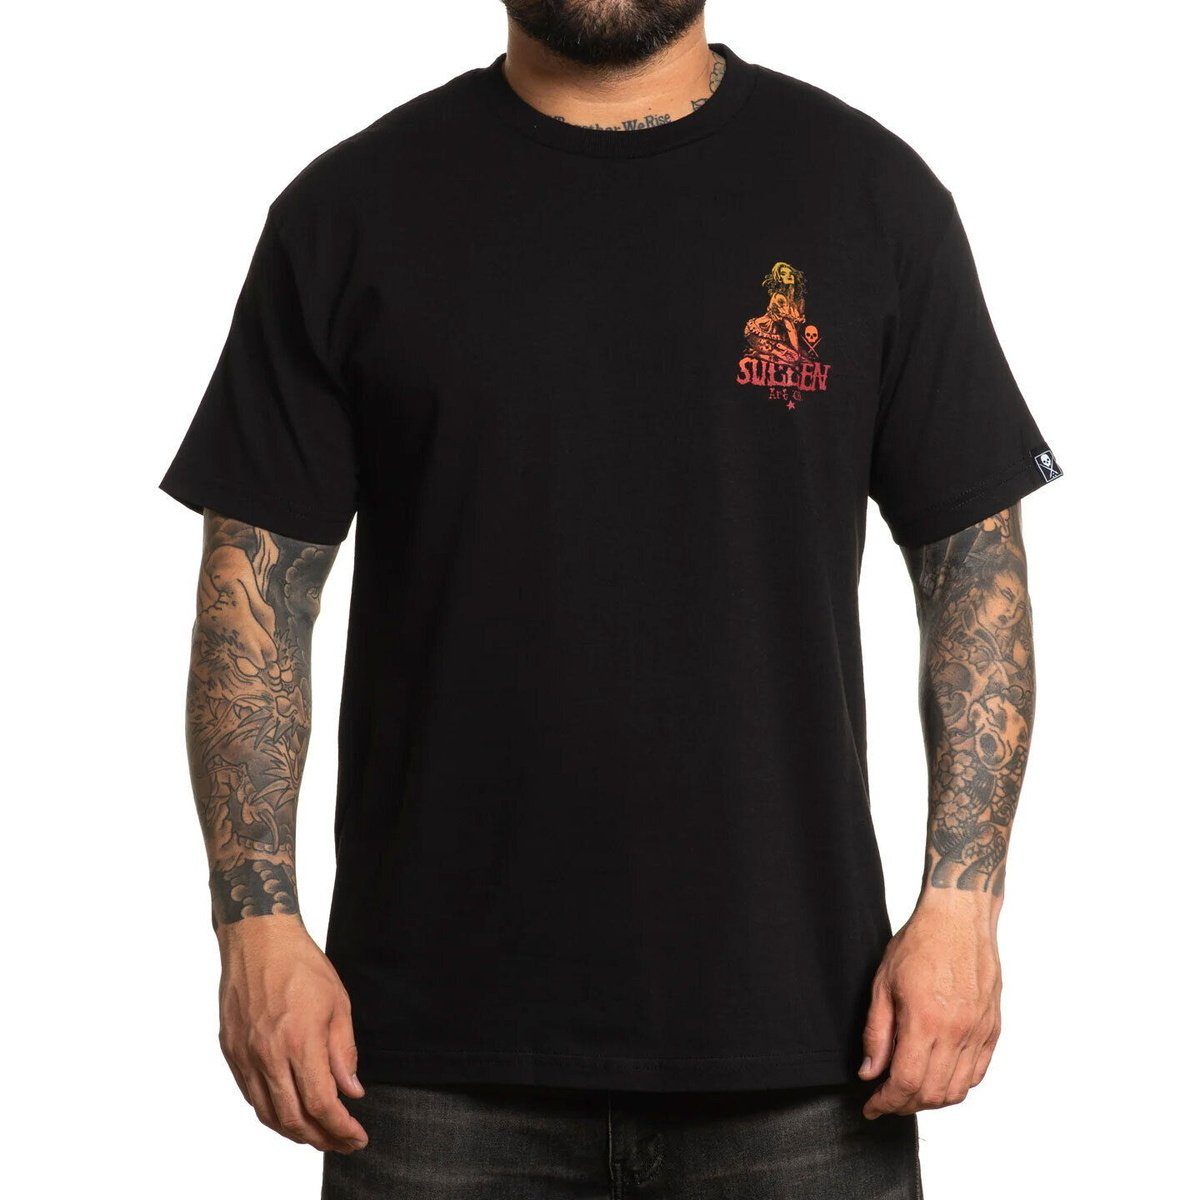 Grave T-Shirt To Sullen Clothing The